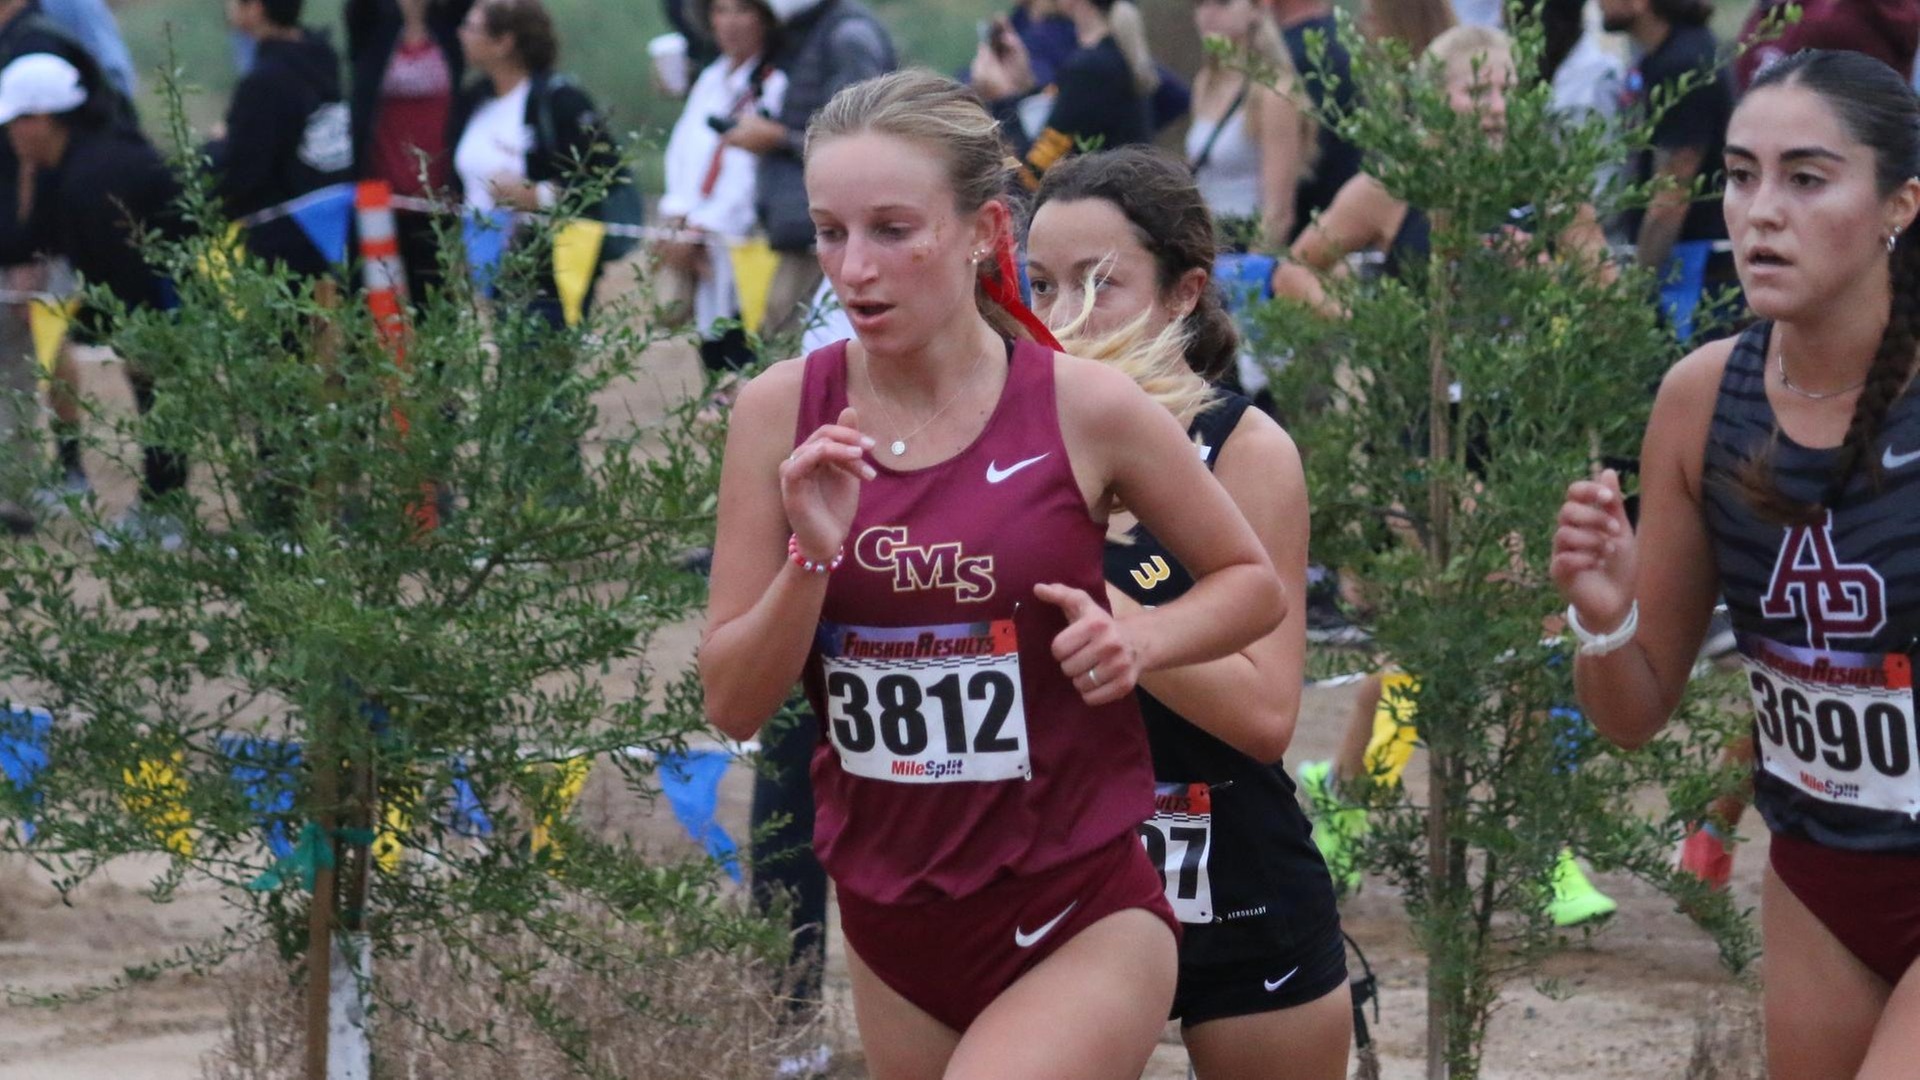 Angie Gushue was 16th as one of five CMS scorers (photo by Christian Campbell)